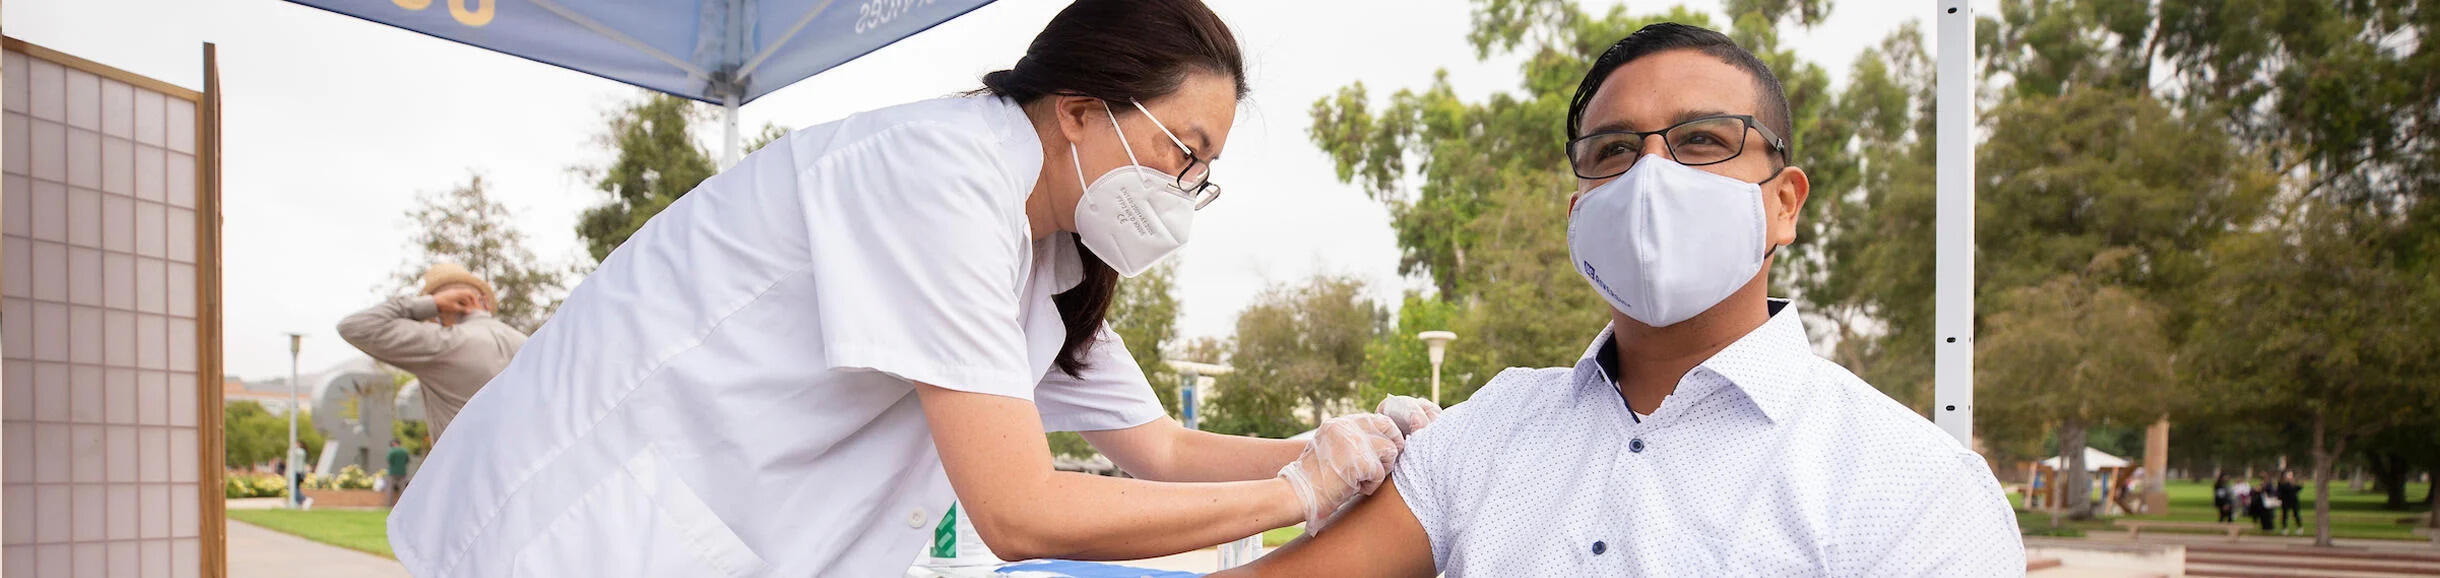 Woman giving a vaccine shot to a patient